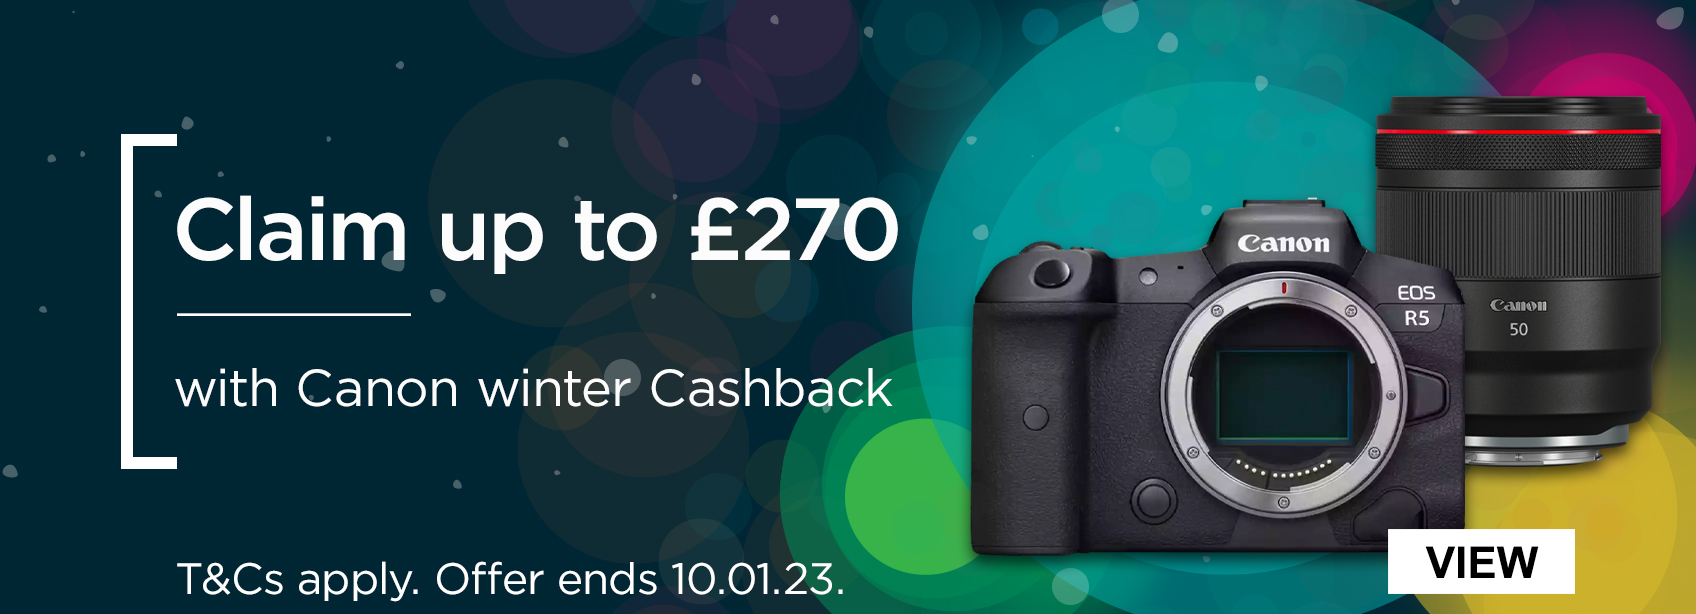 Claim up to £270 with Canon winter cashback